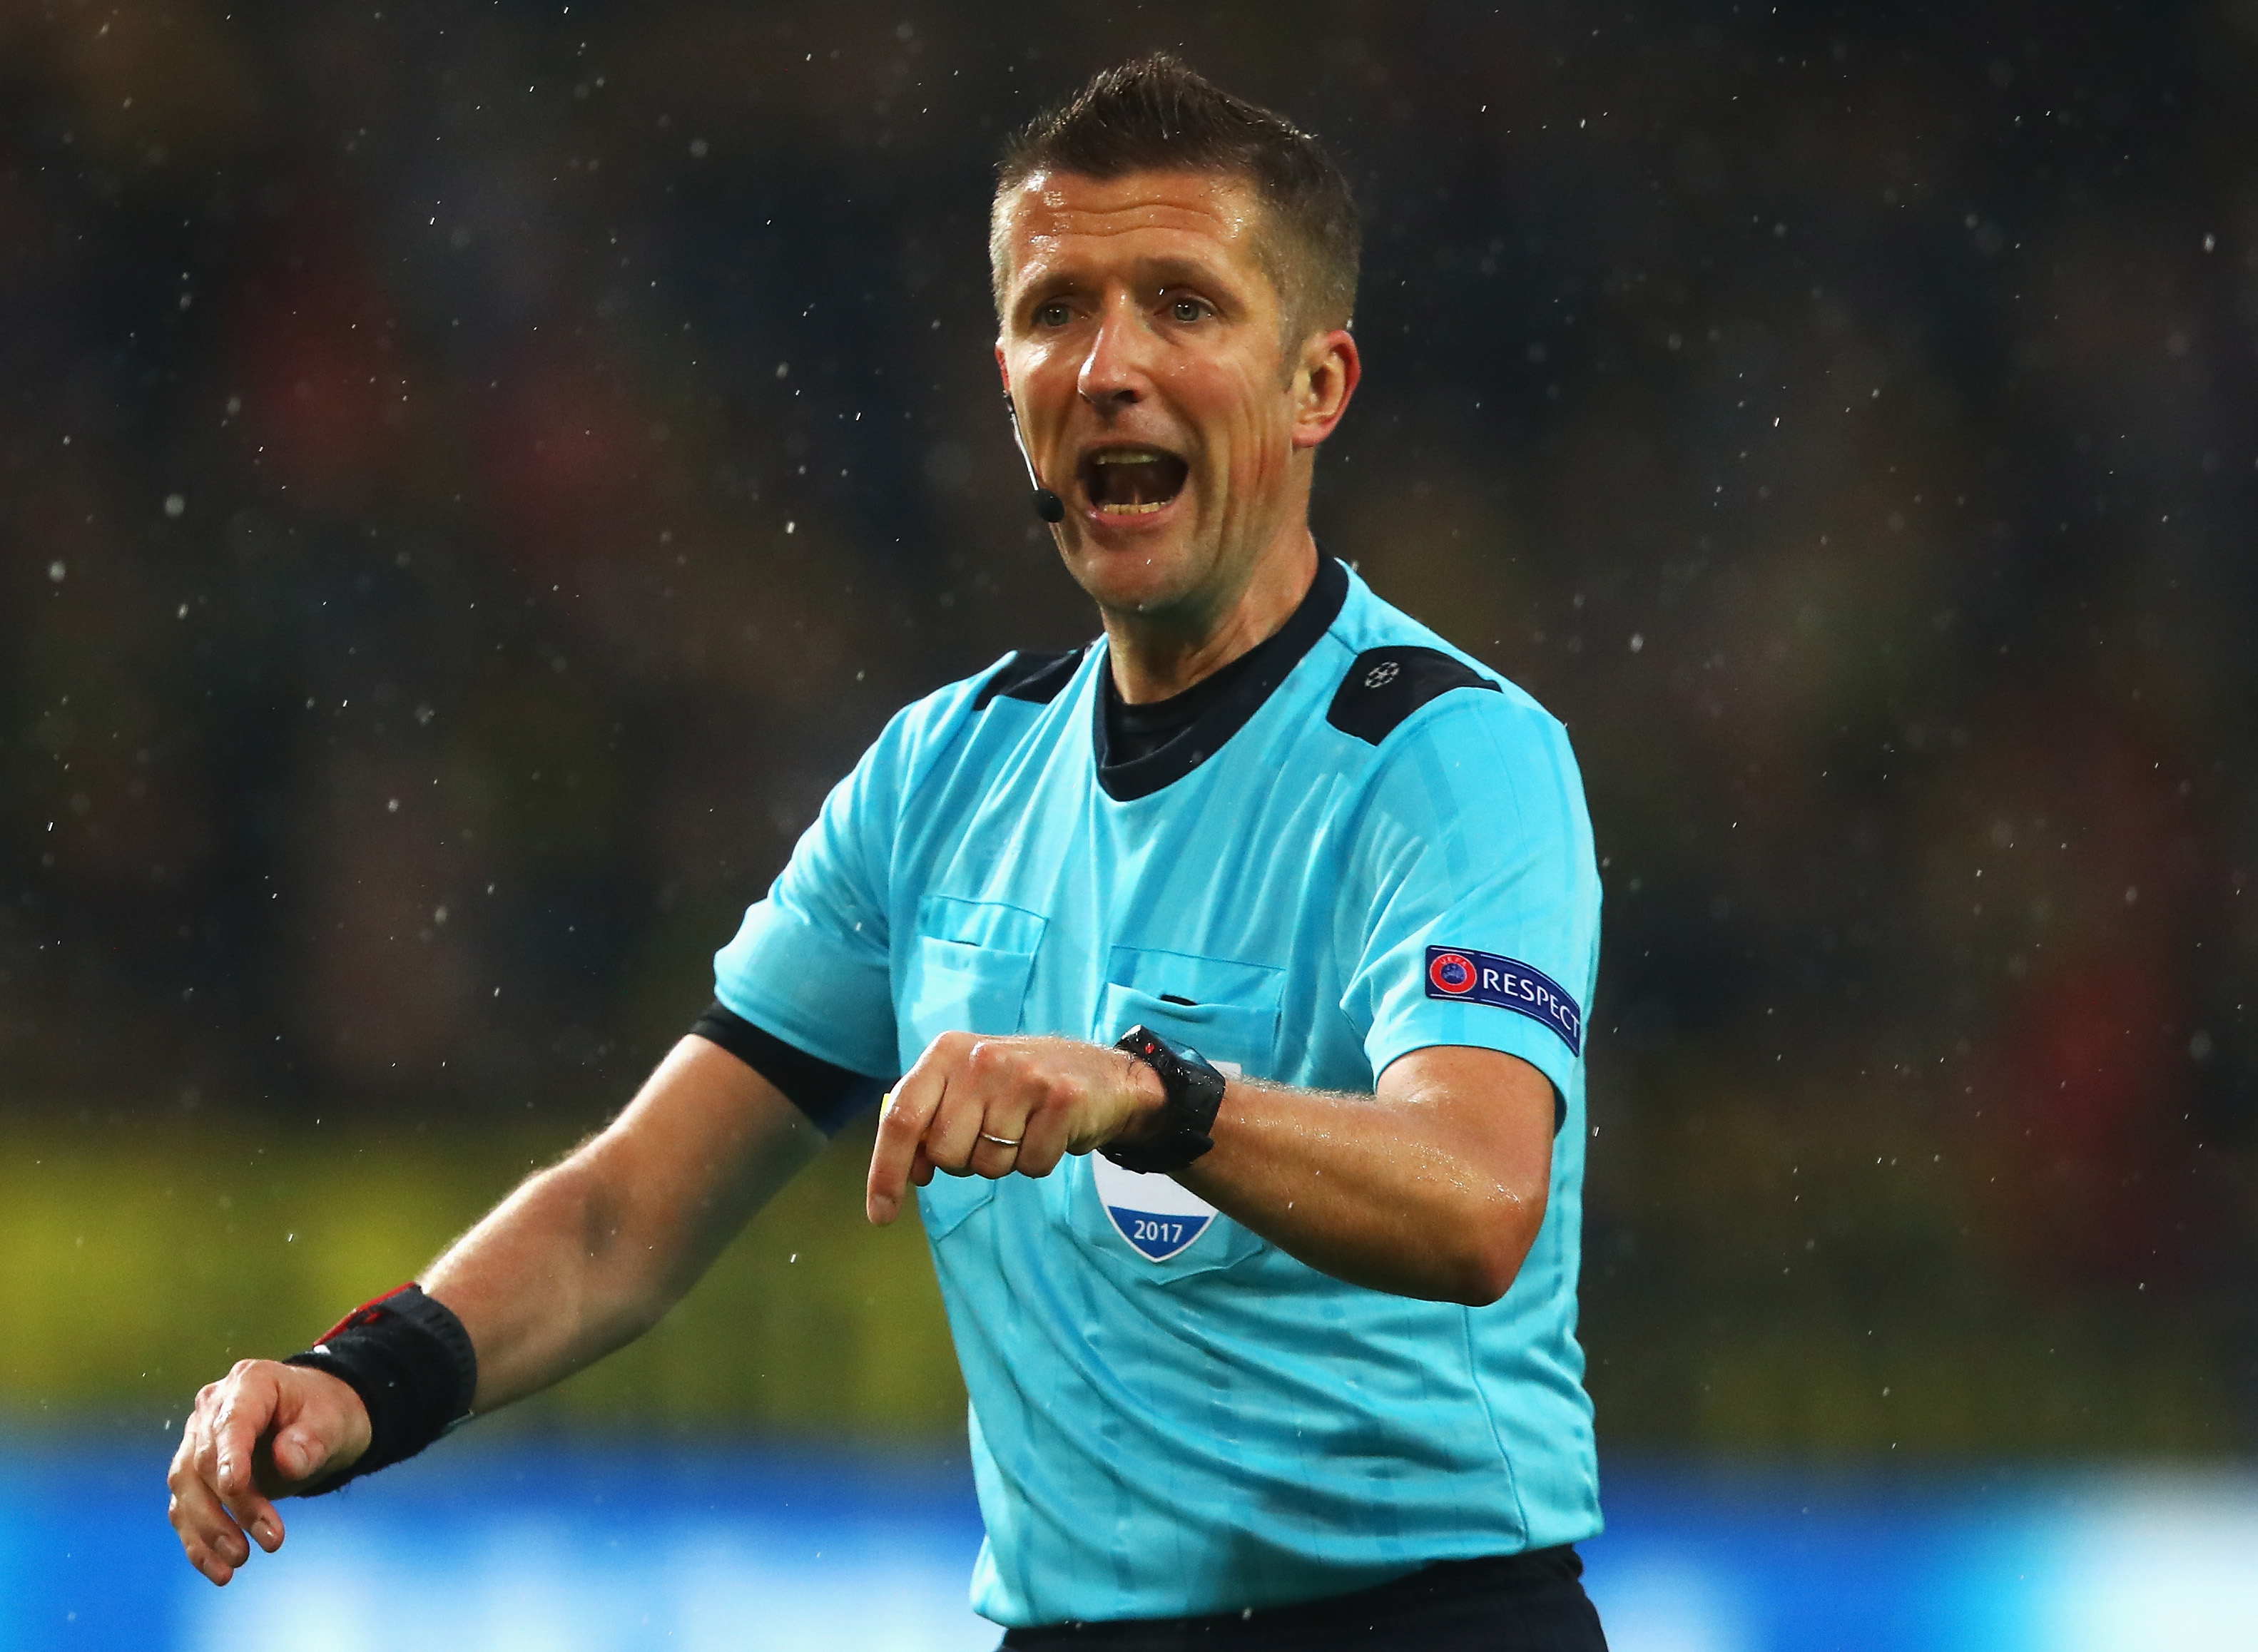 Inter Fans Angry As Daniele Orsato Referees Nerazzurri Match For First Time In 1233 days, Italian Media Report